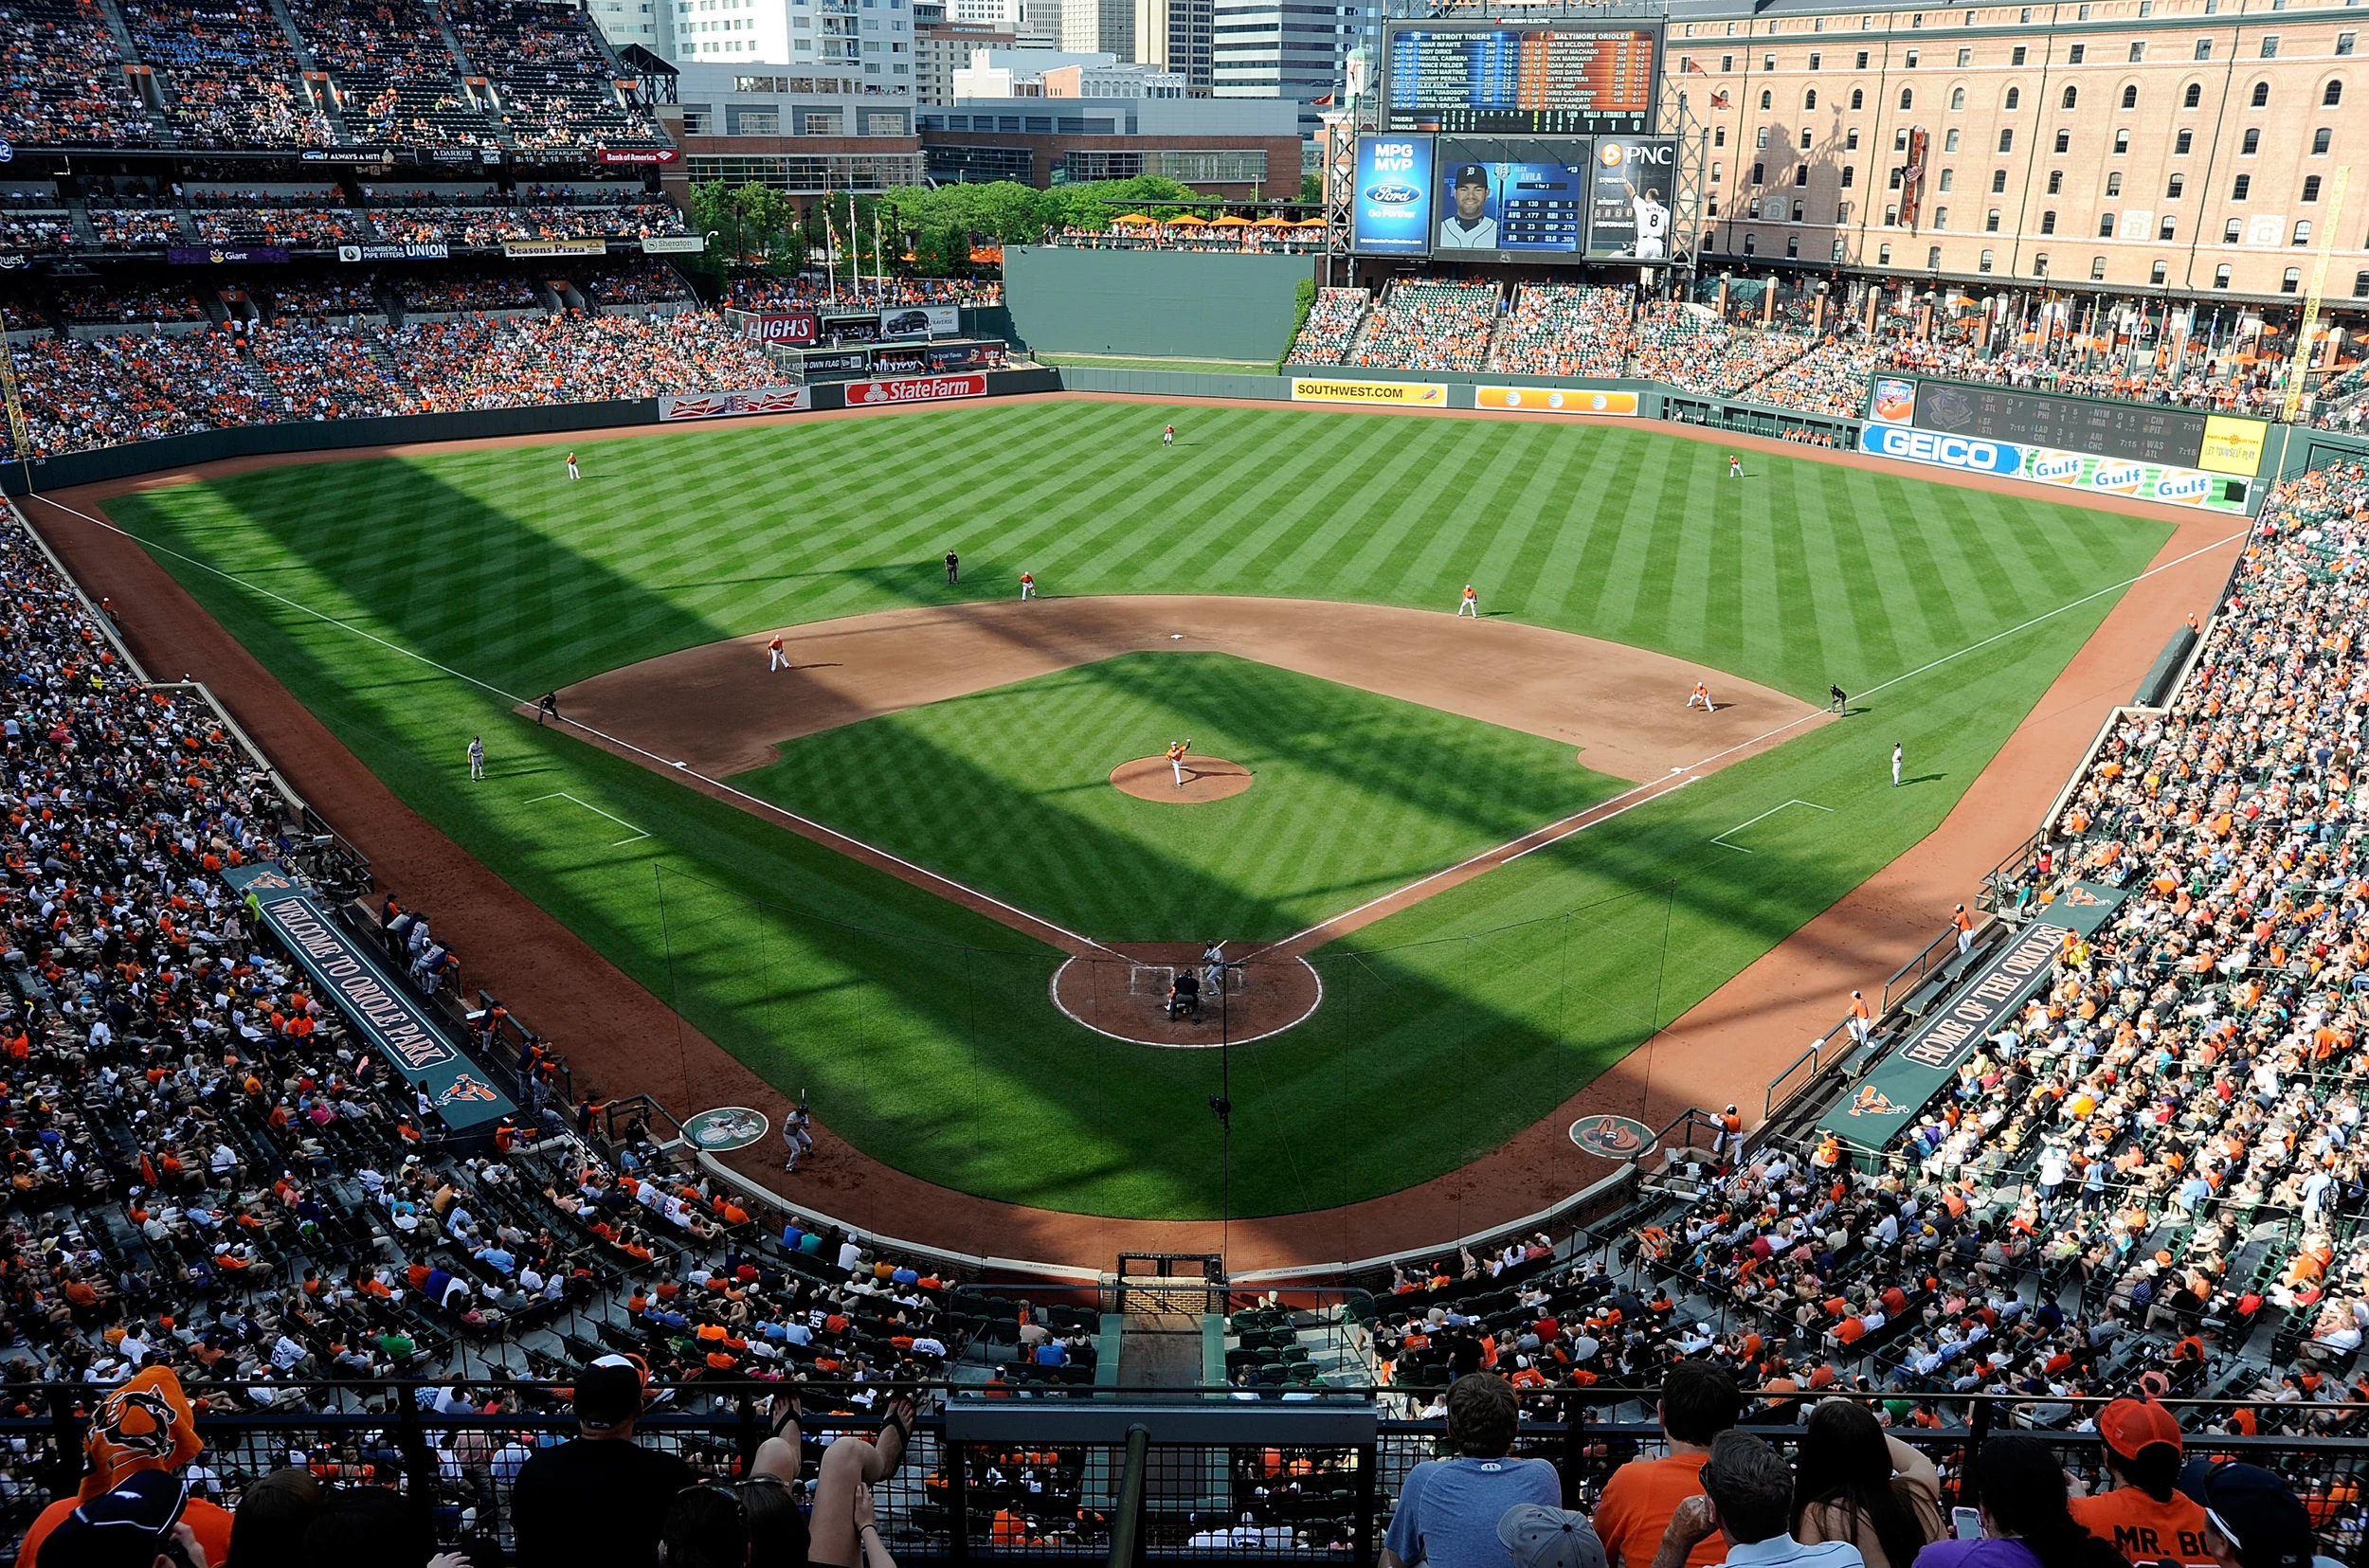 MLB analyst infuriated by Orioles fans' shocking behavior towards